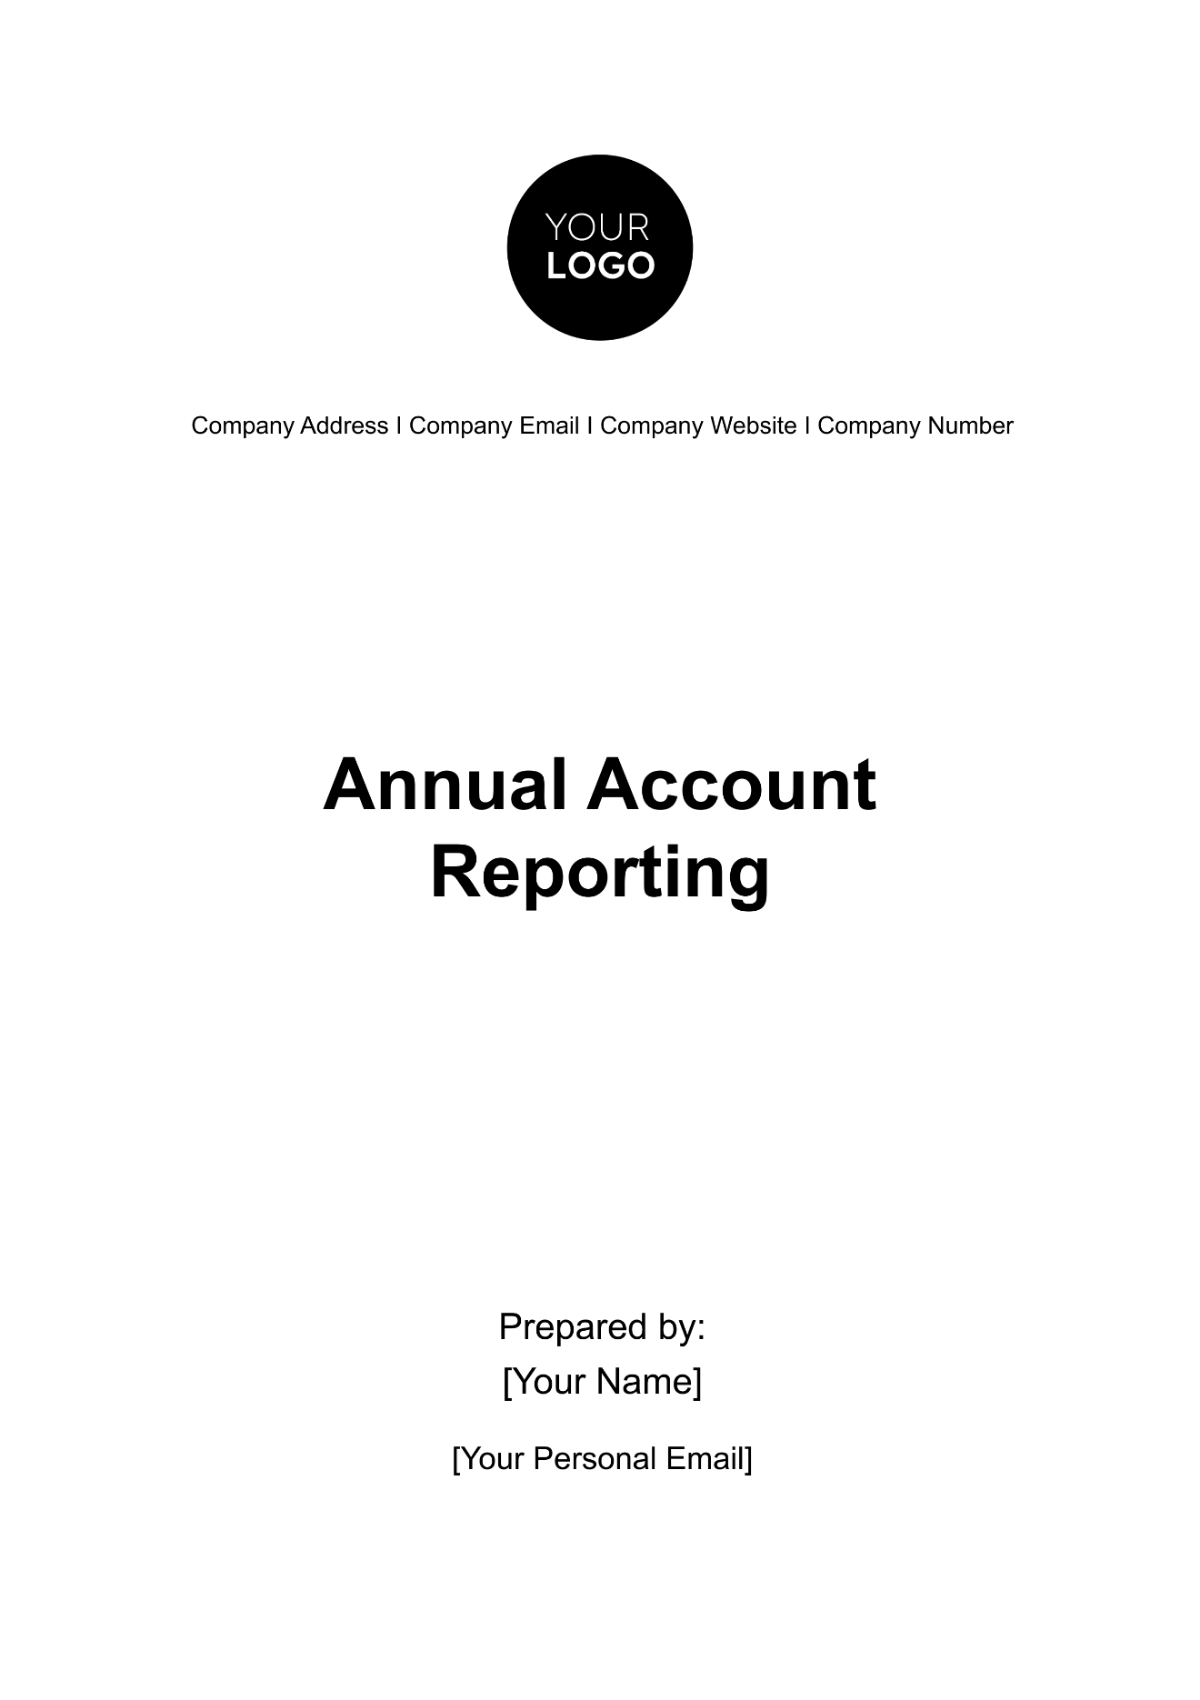 Free Annual Account Reporting Template